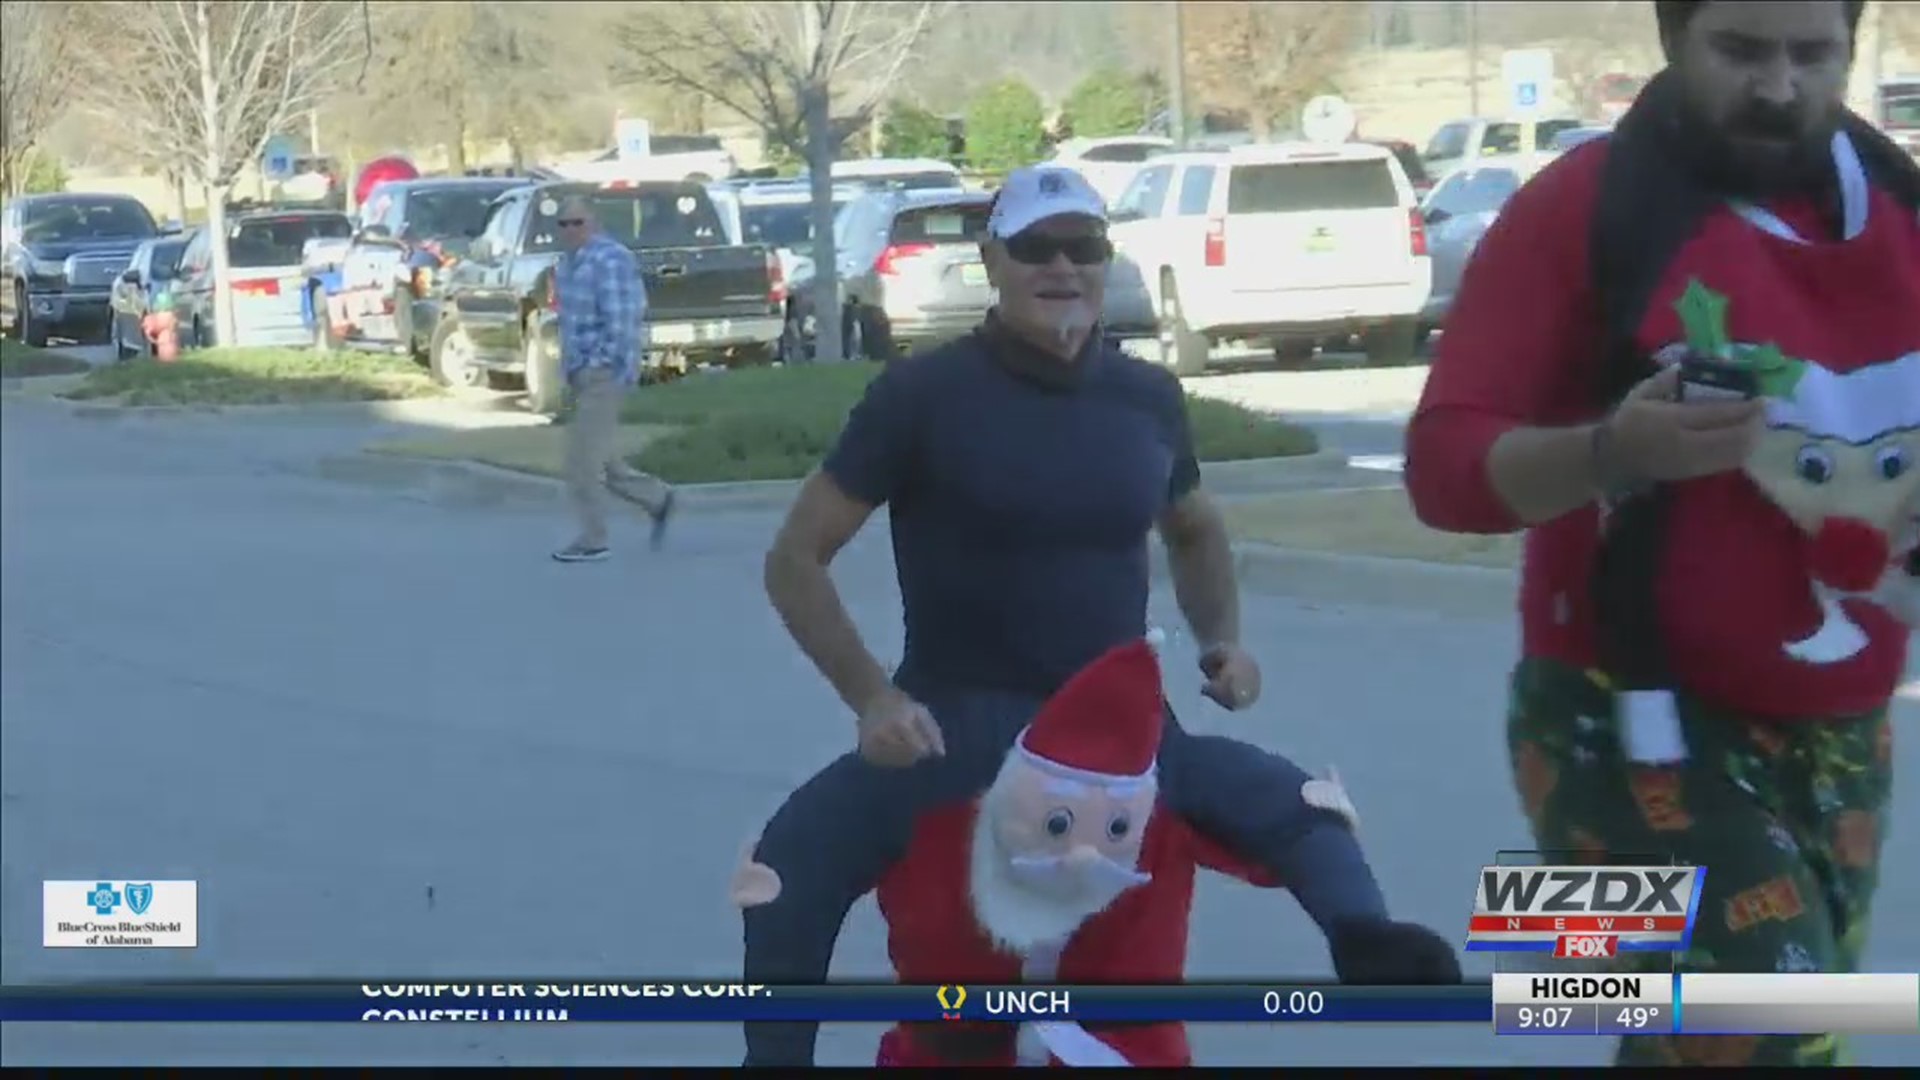 Folks put on their most attention-grabbing holiday gear, but you’d be surprised by where they were wearing it. It’s the annual “Ugly Sweater Run” in Huntsville, and locals stayed fit while being festive.